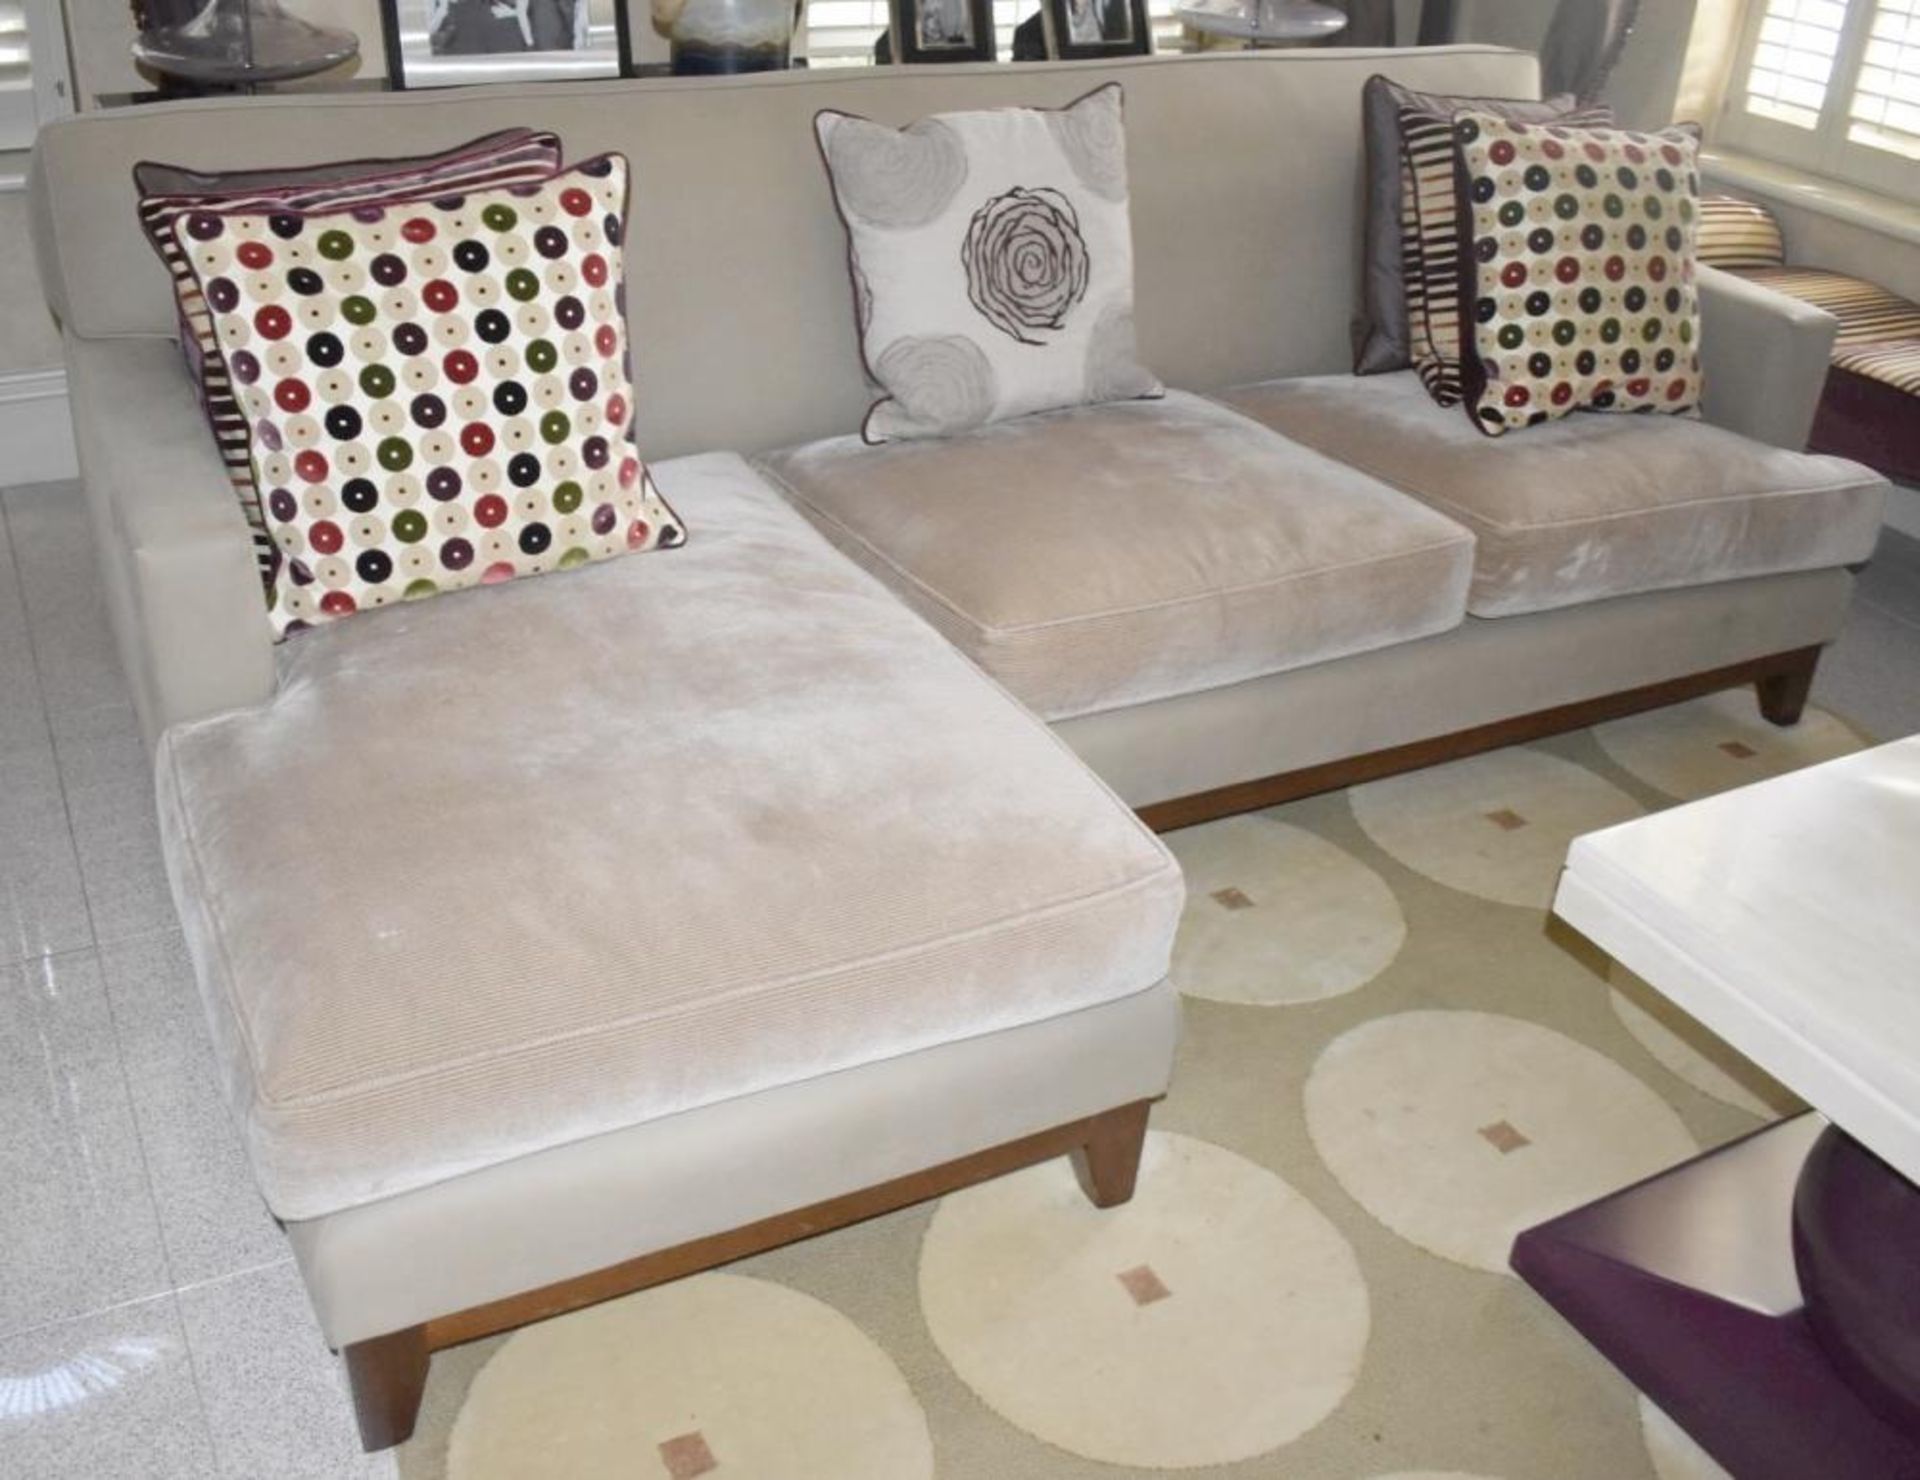 1 x Left-Hand Corner Sofa Upholstered In Light Cream Leather And Chenille Fabrics - RRP £15,000